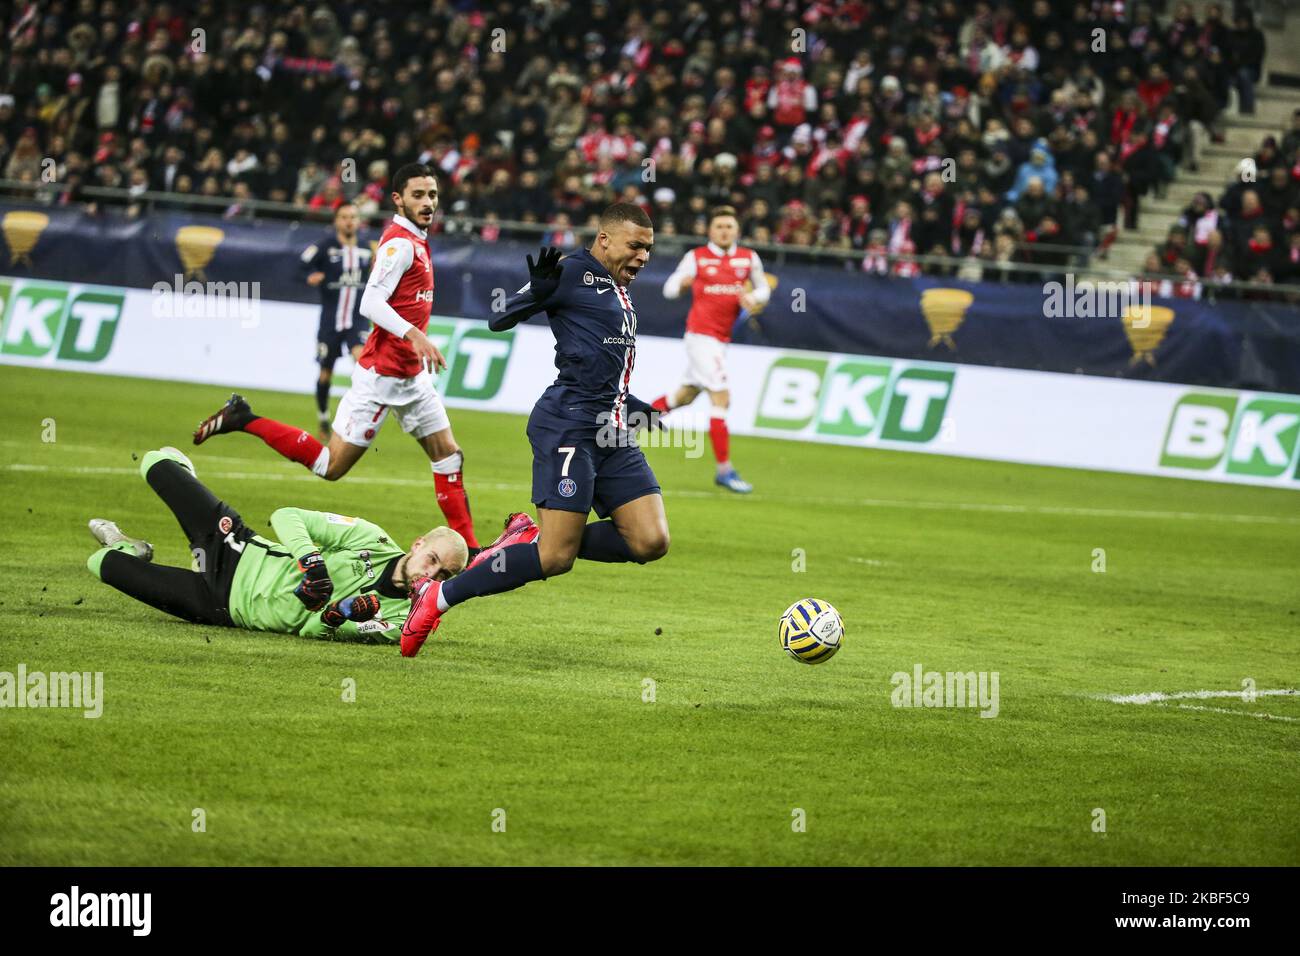 Kylian Mbape and Rajkovic Predrag during the French League Cup semi-final football match between Stade de Reims and Paris Saint-Germain at the Auguste Delaune Stadium in Reims on January 22, 2020. (Photo by Elyxandro Cegarra/NurPhoto) Stock Photo